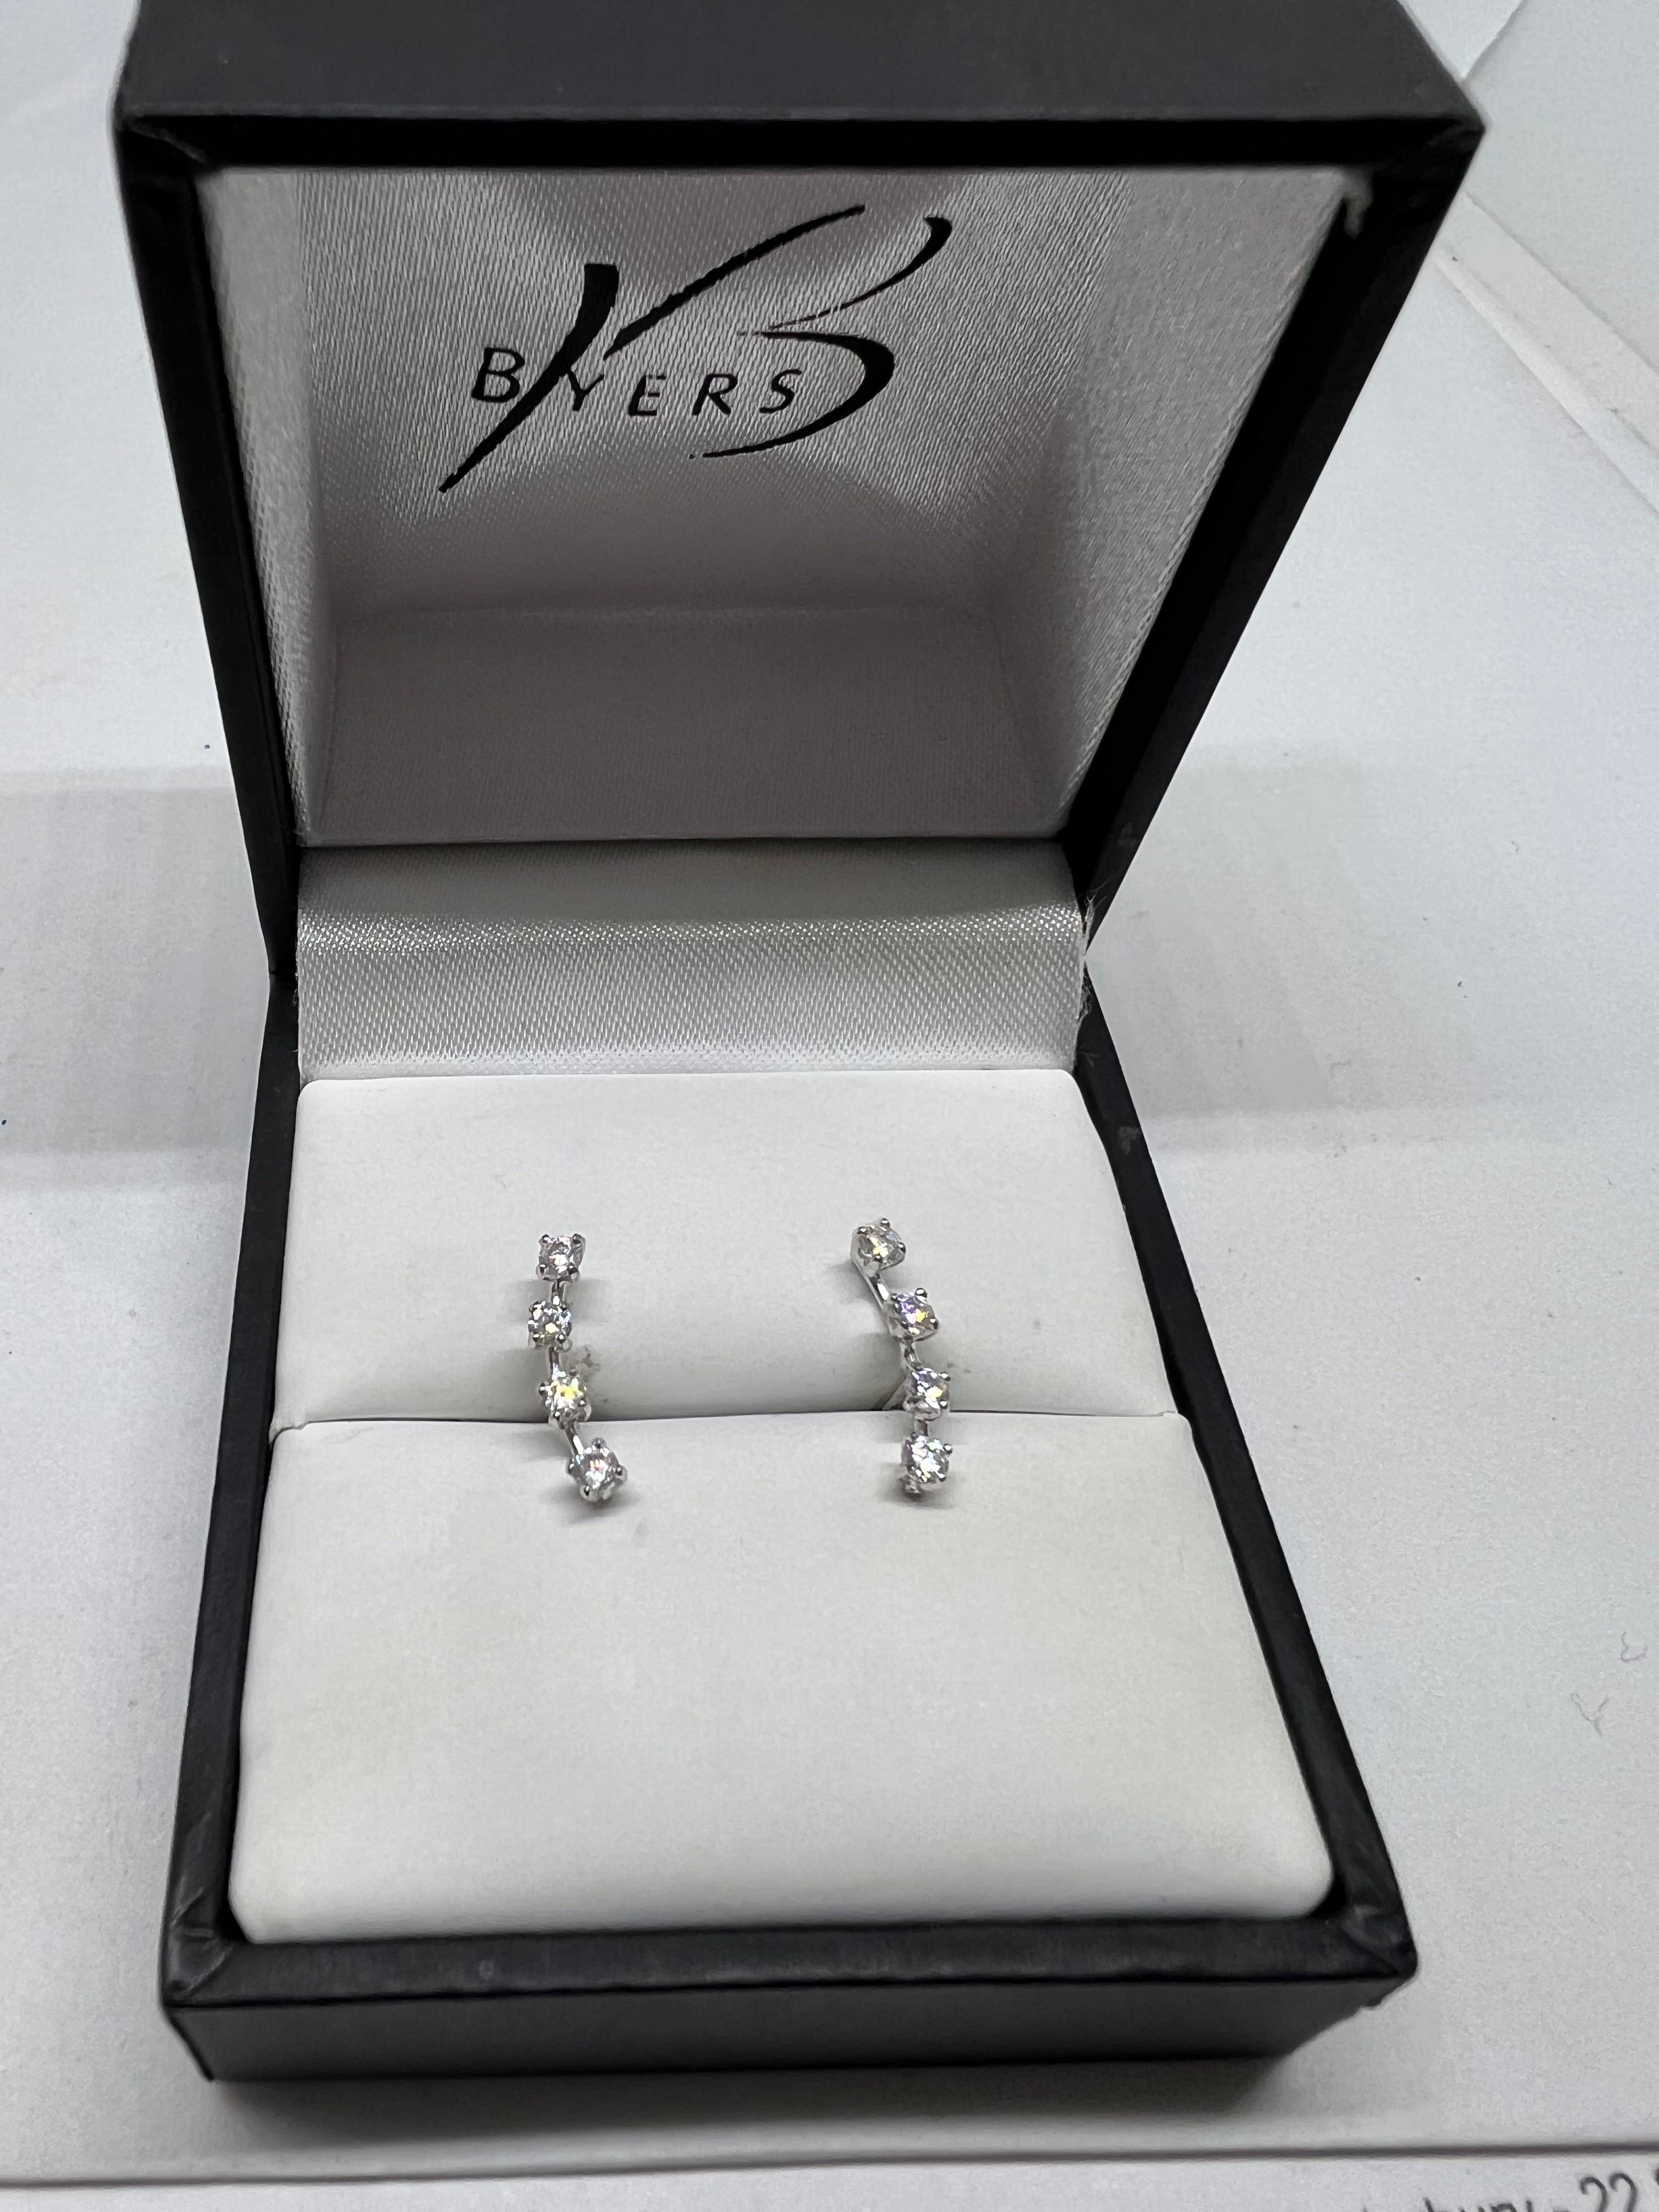 9ct White Gold 4 Stone Cubic Zirconia Earrings #20515